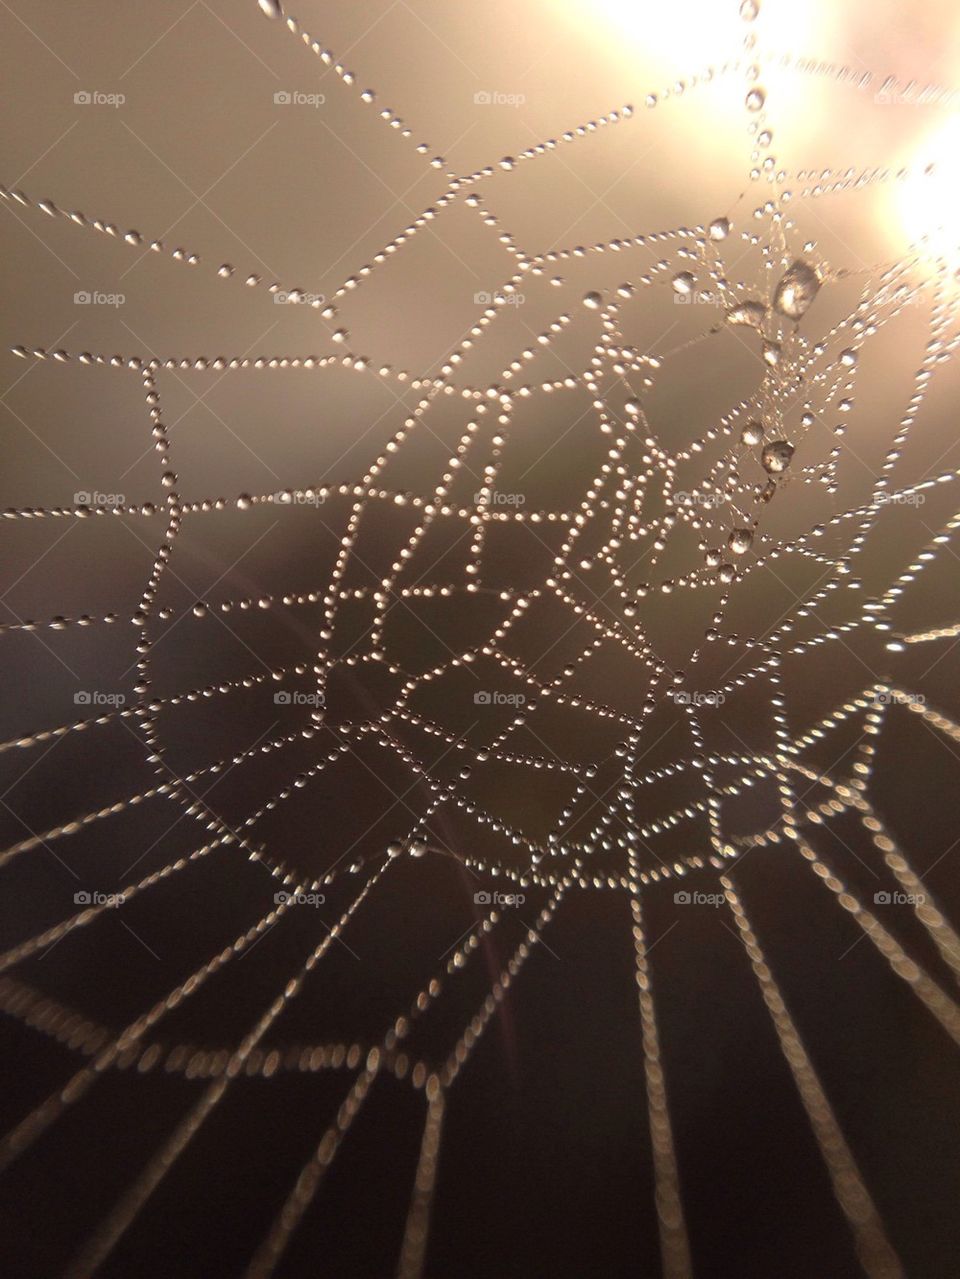 Spiderweb with drops